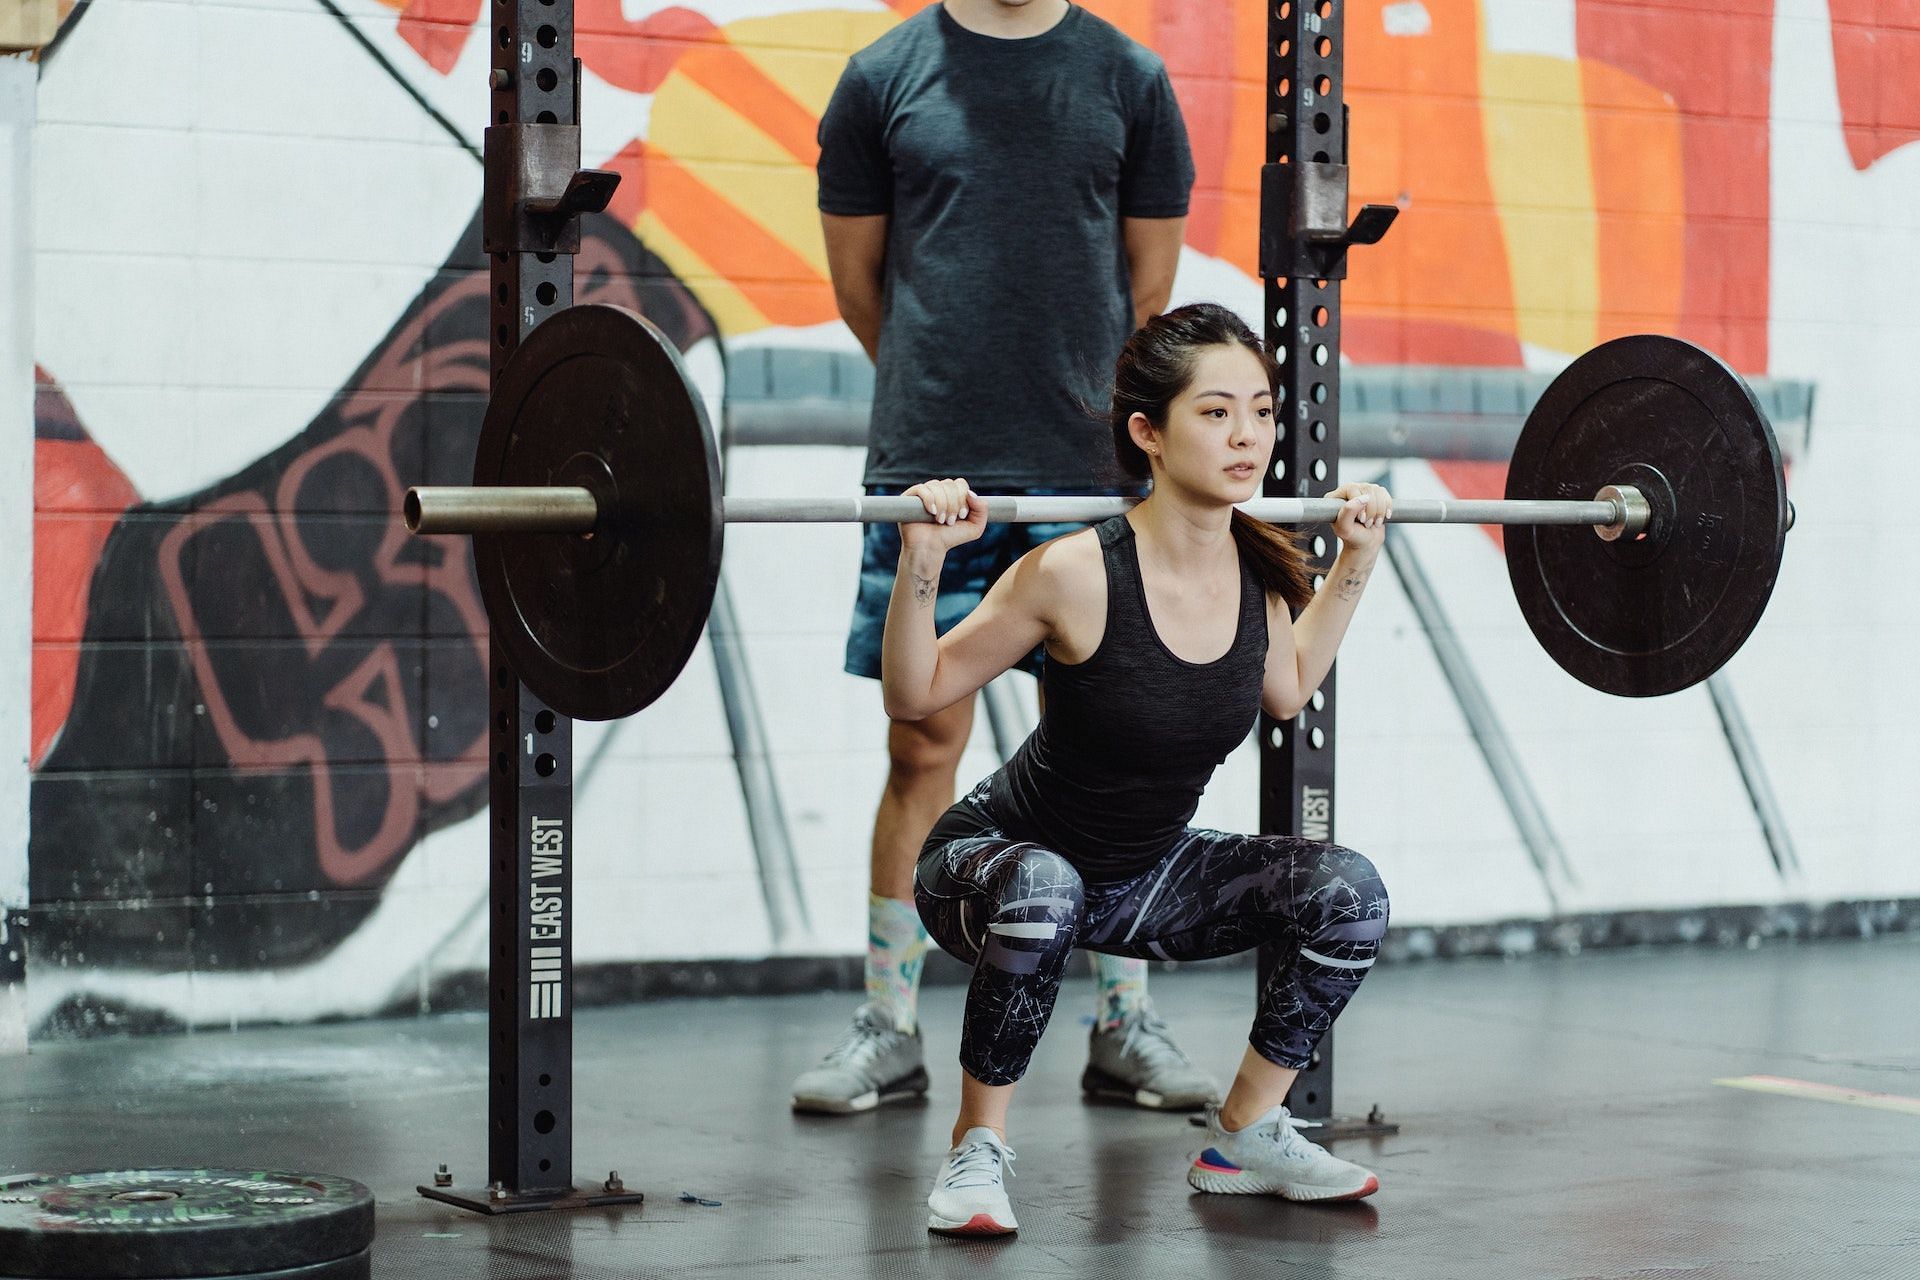 Goblet squats are an excellent exercise to add to your outer thigh workout. (Photo via Pexels/Ketut Subiyanto)